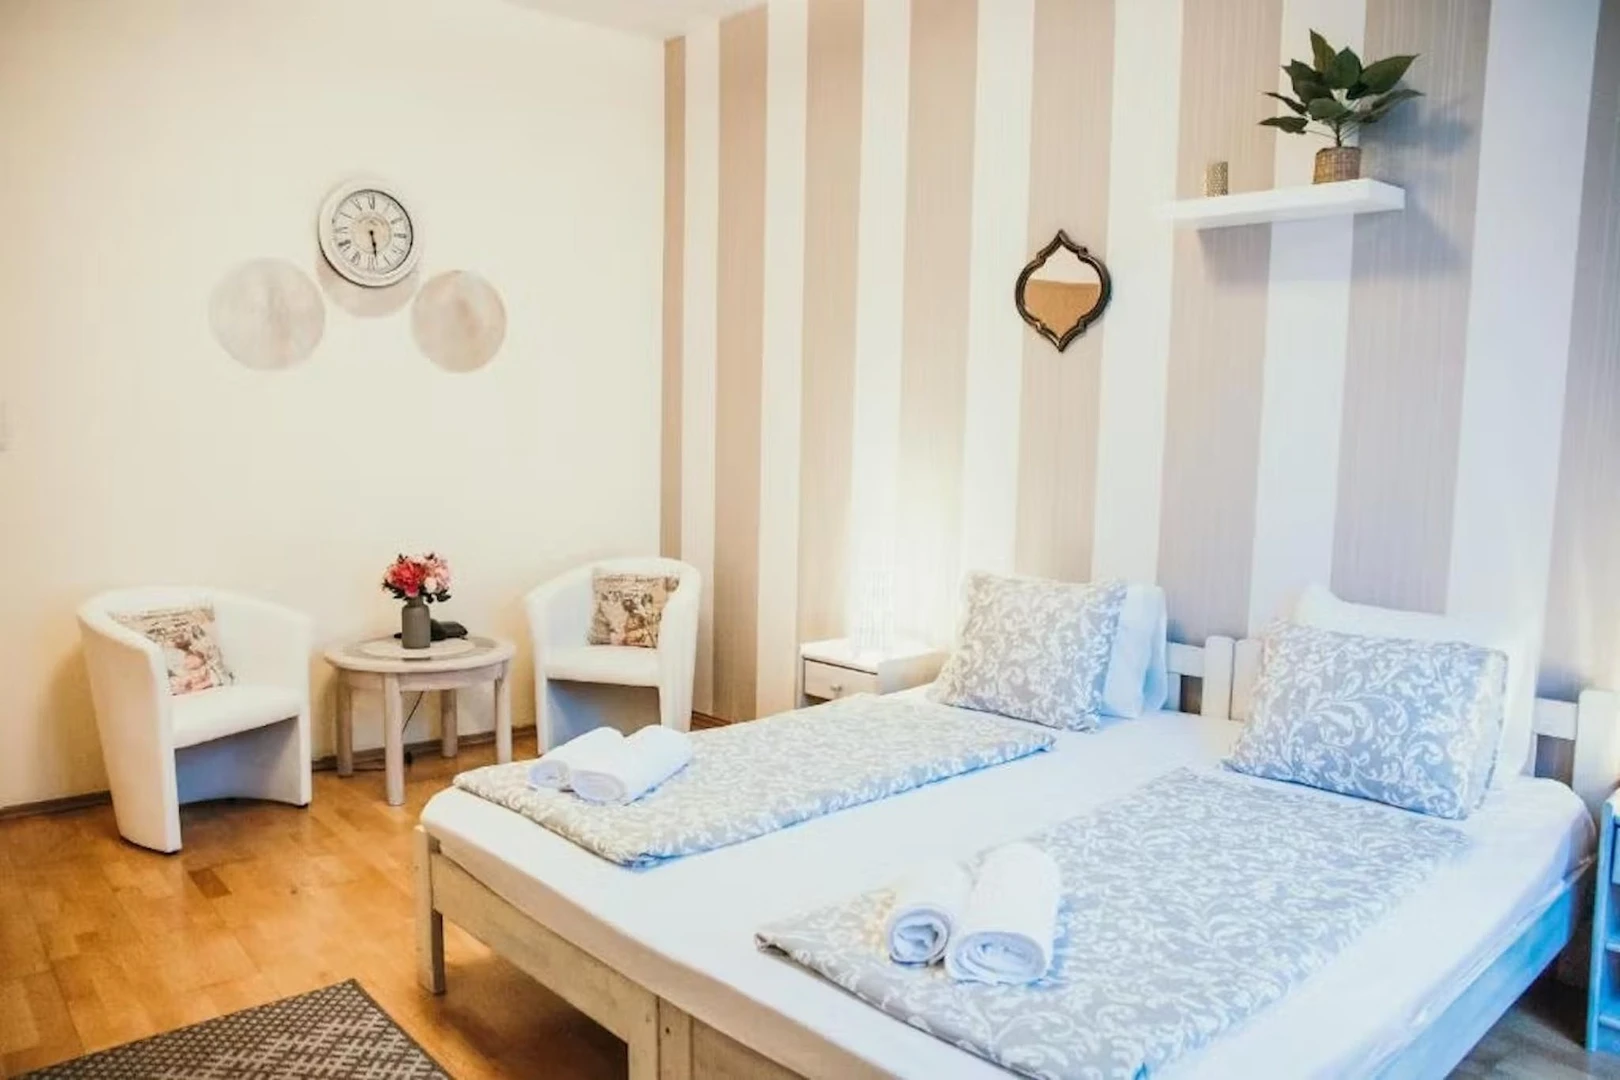 Room for rent in a shared flat in budapest